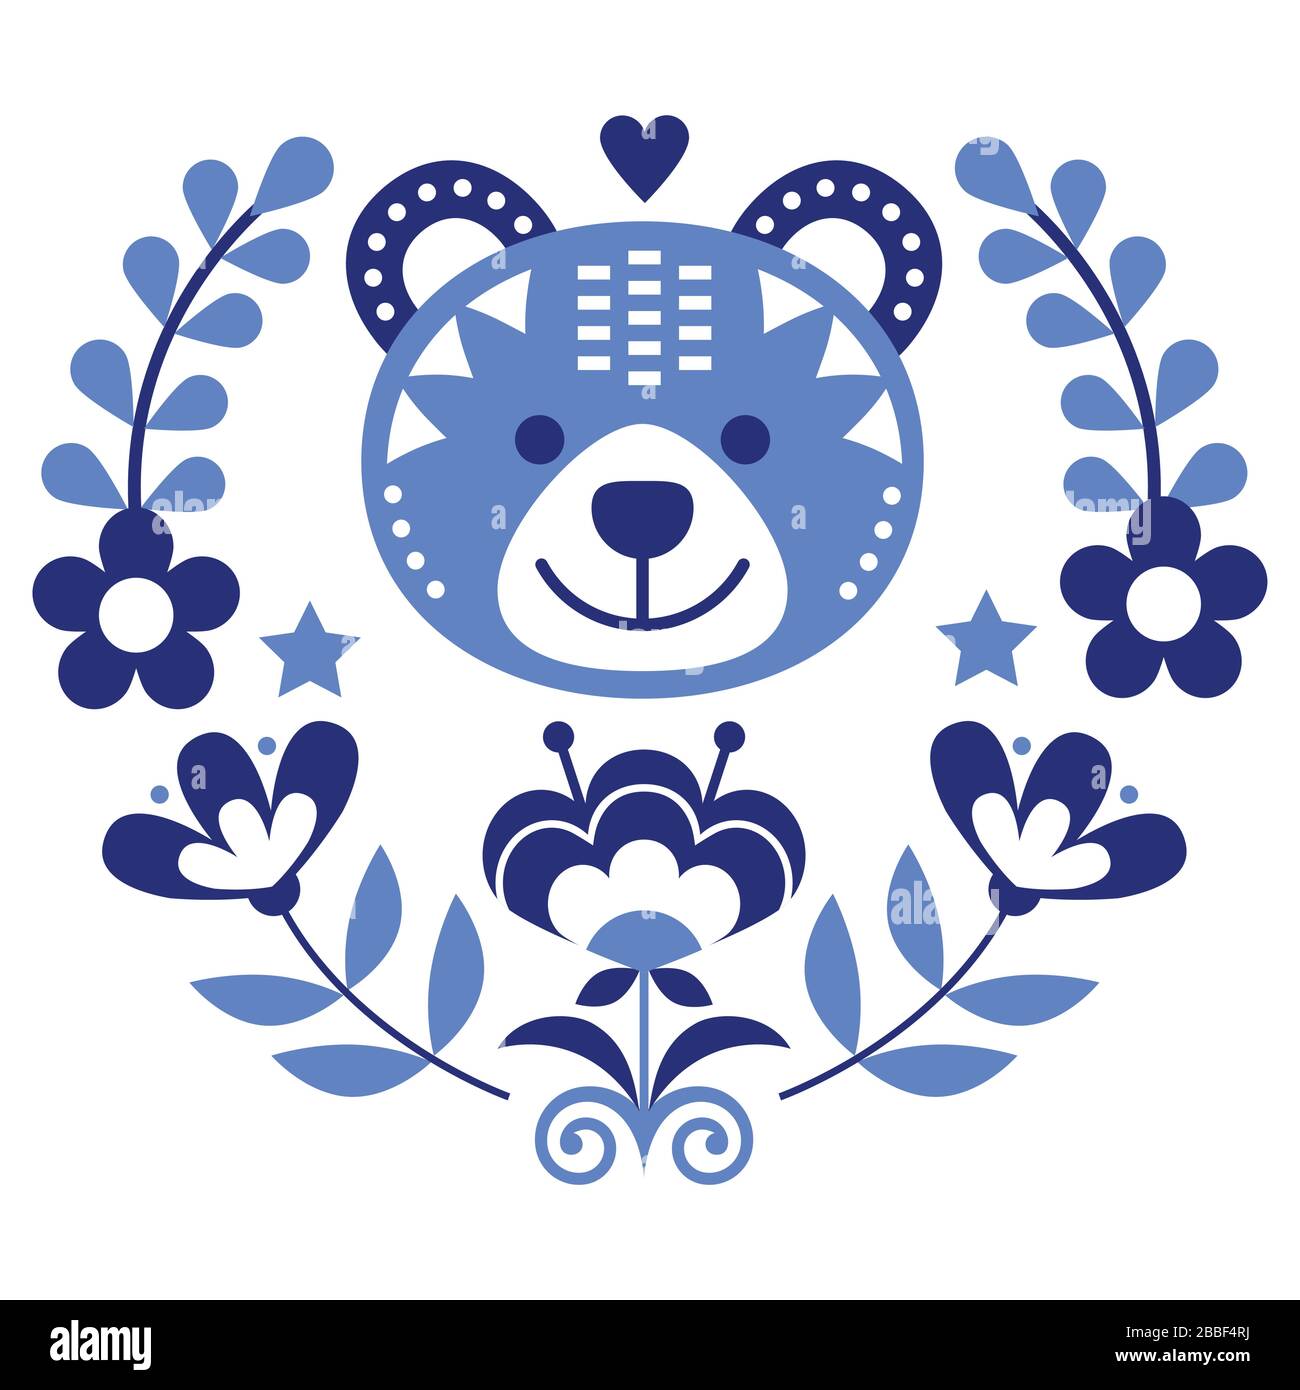 Scandinavian bear folk art vector round pattern with flowers and wreath, Nordic floral greeting card or invitation inspired by traditional embroidery Stock Vector